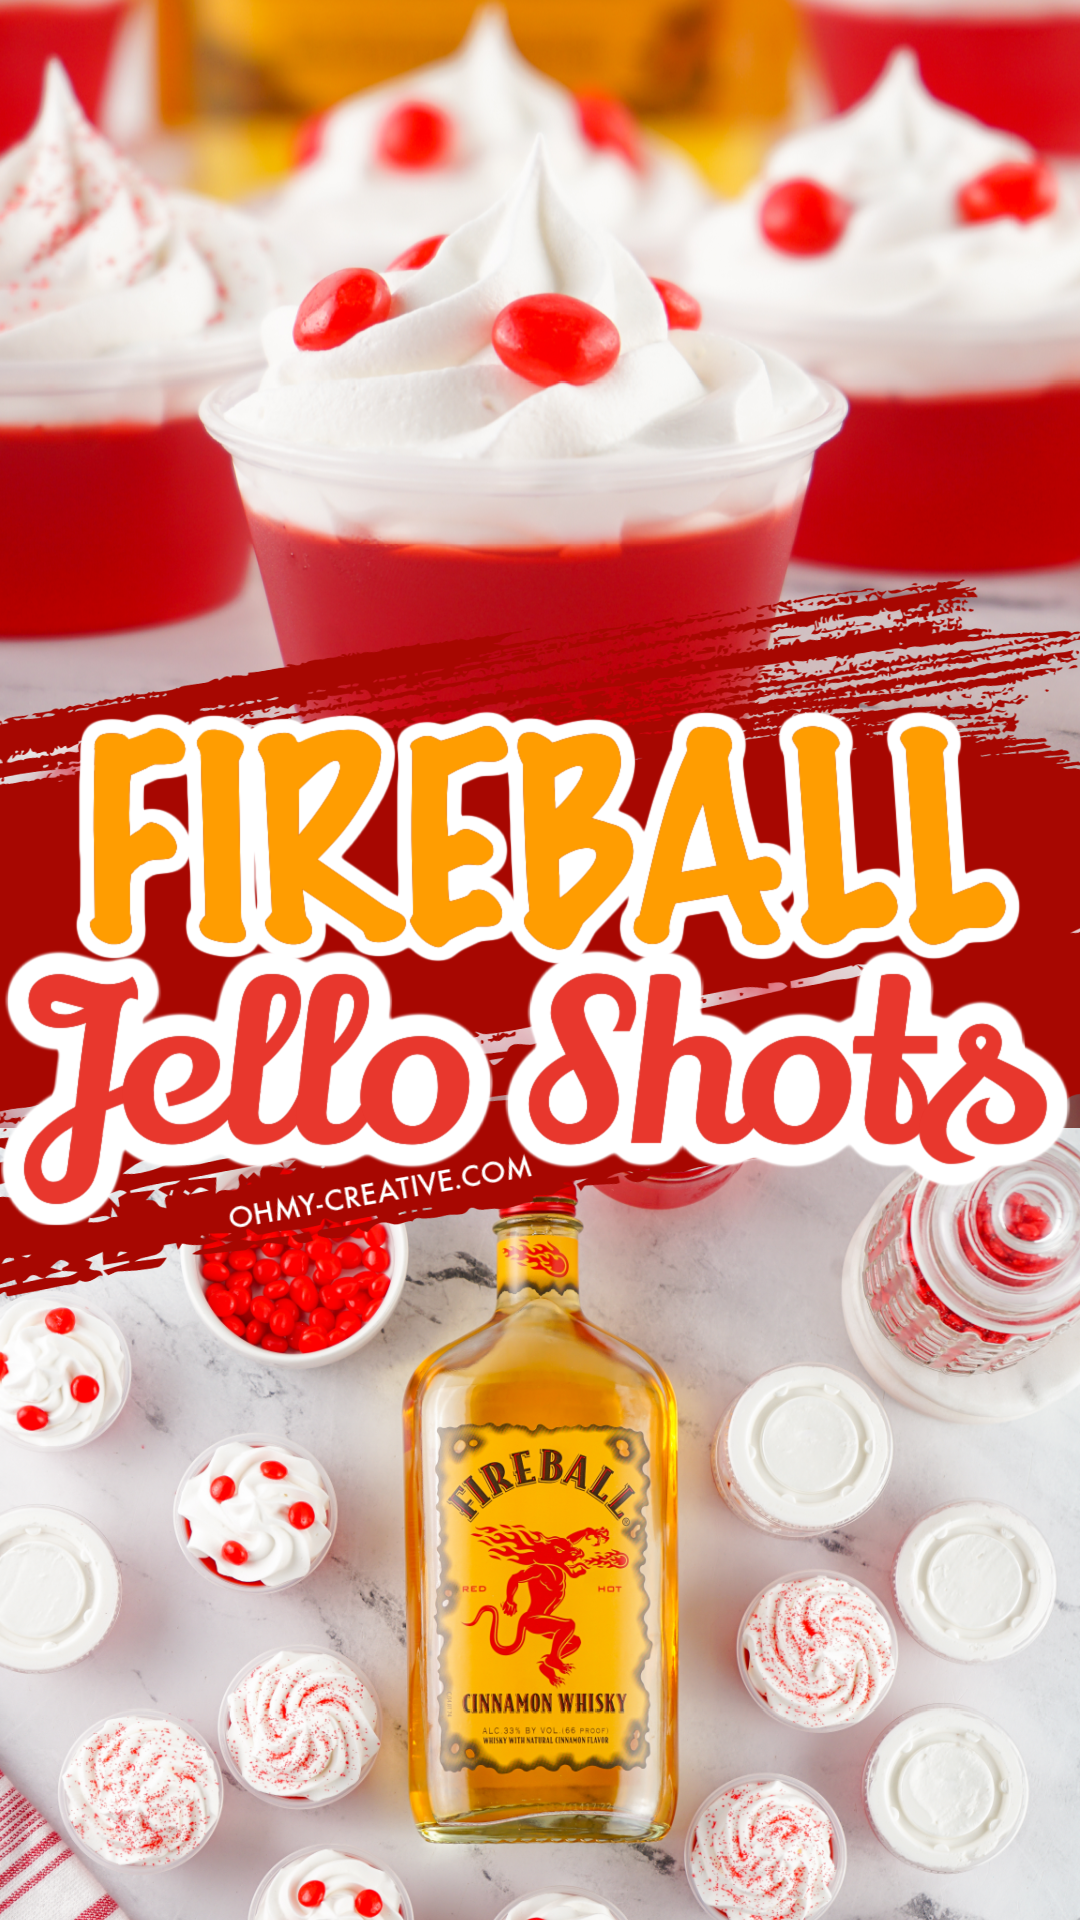 Double image pin or Red fireball jello shots with a bottle of Fireball in the background. Topped with whipped cream and red hot candy.